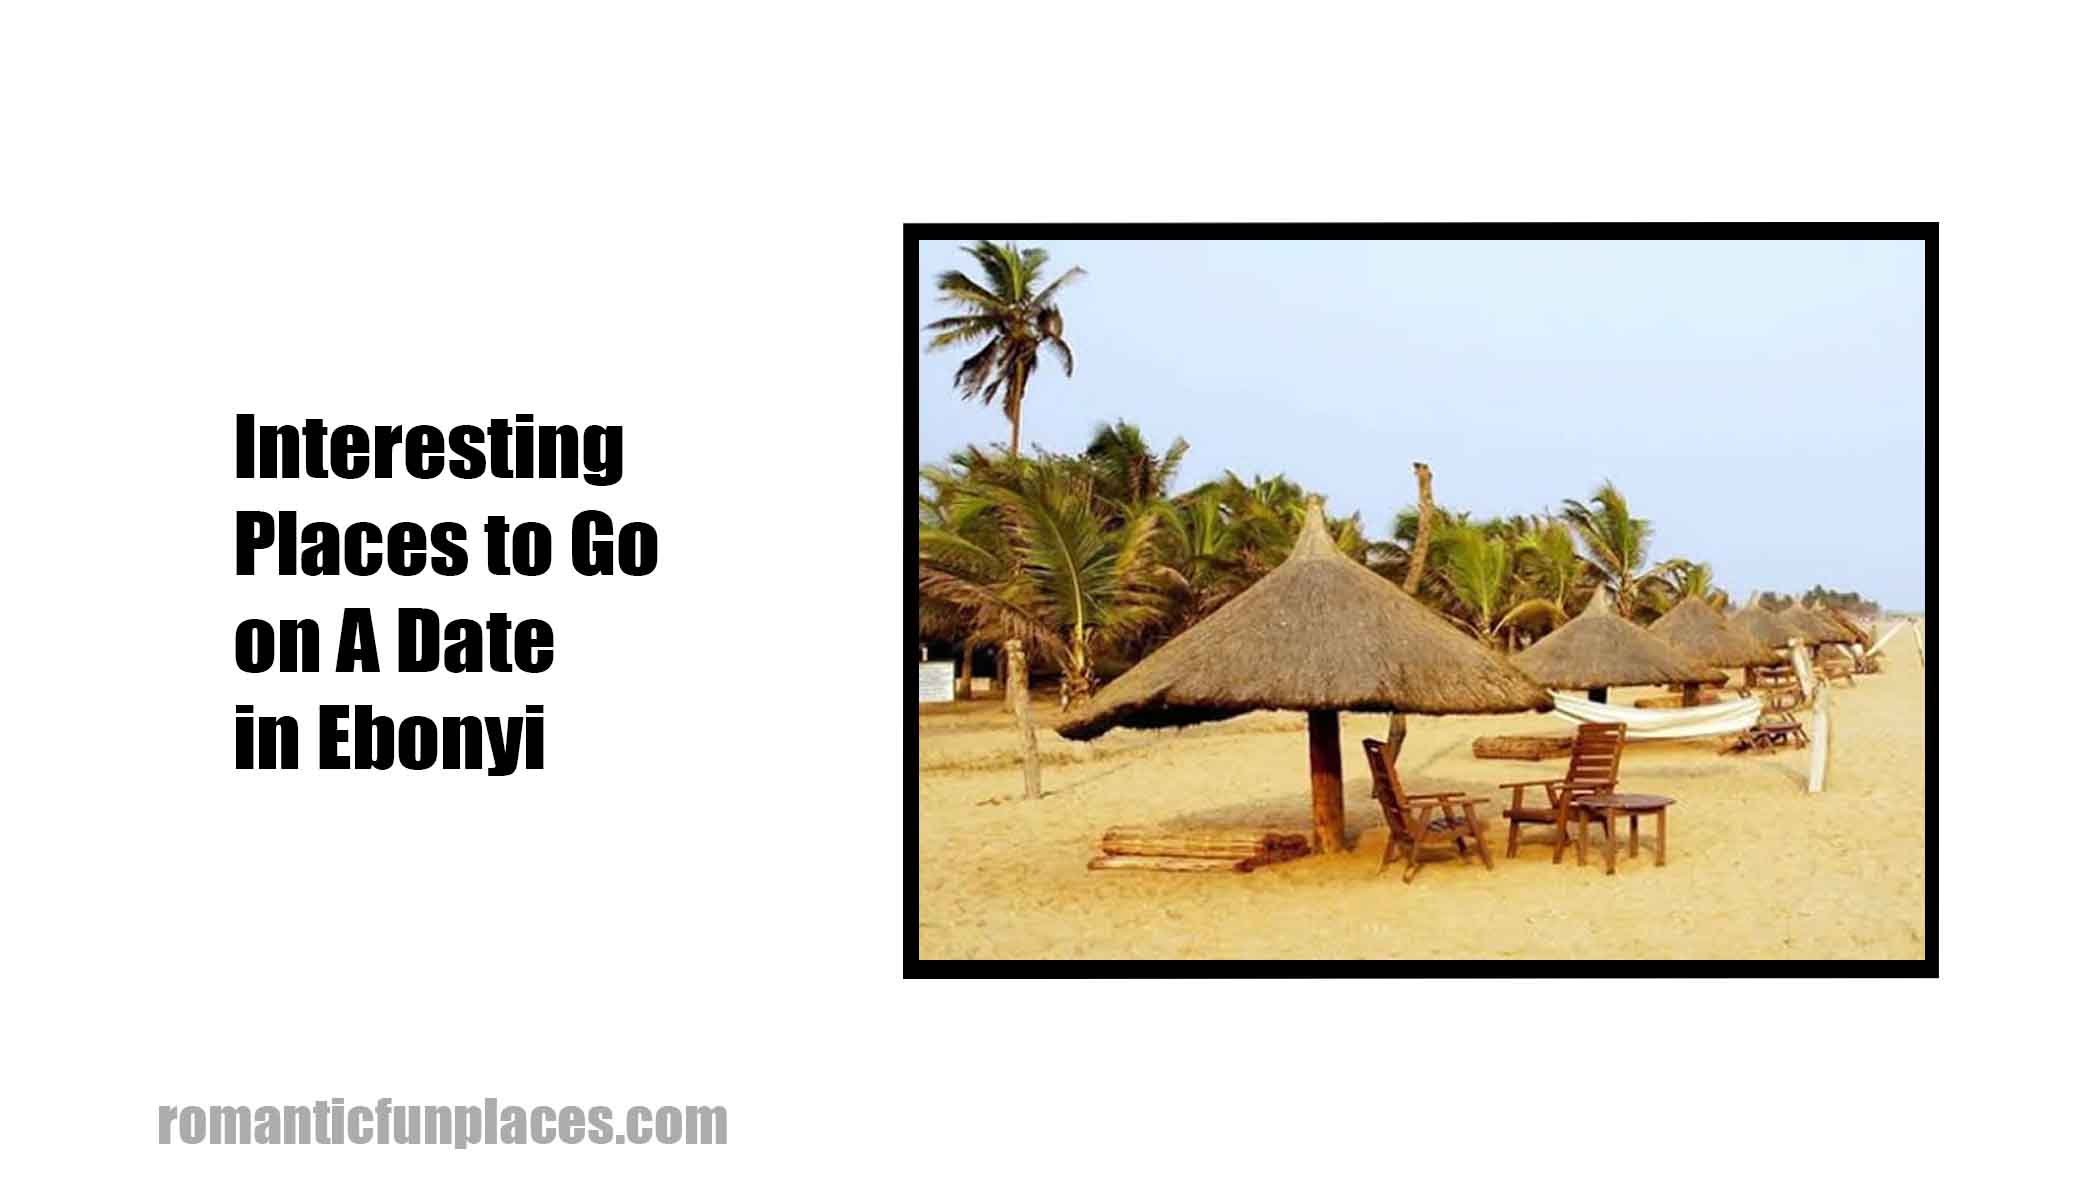 Interesting Places to Go on A Date in Ebonyi